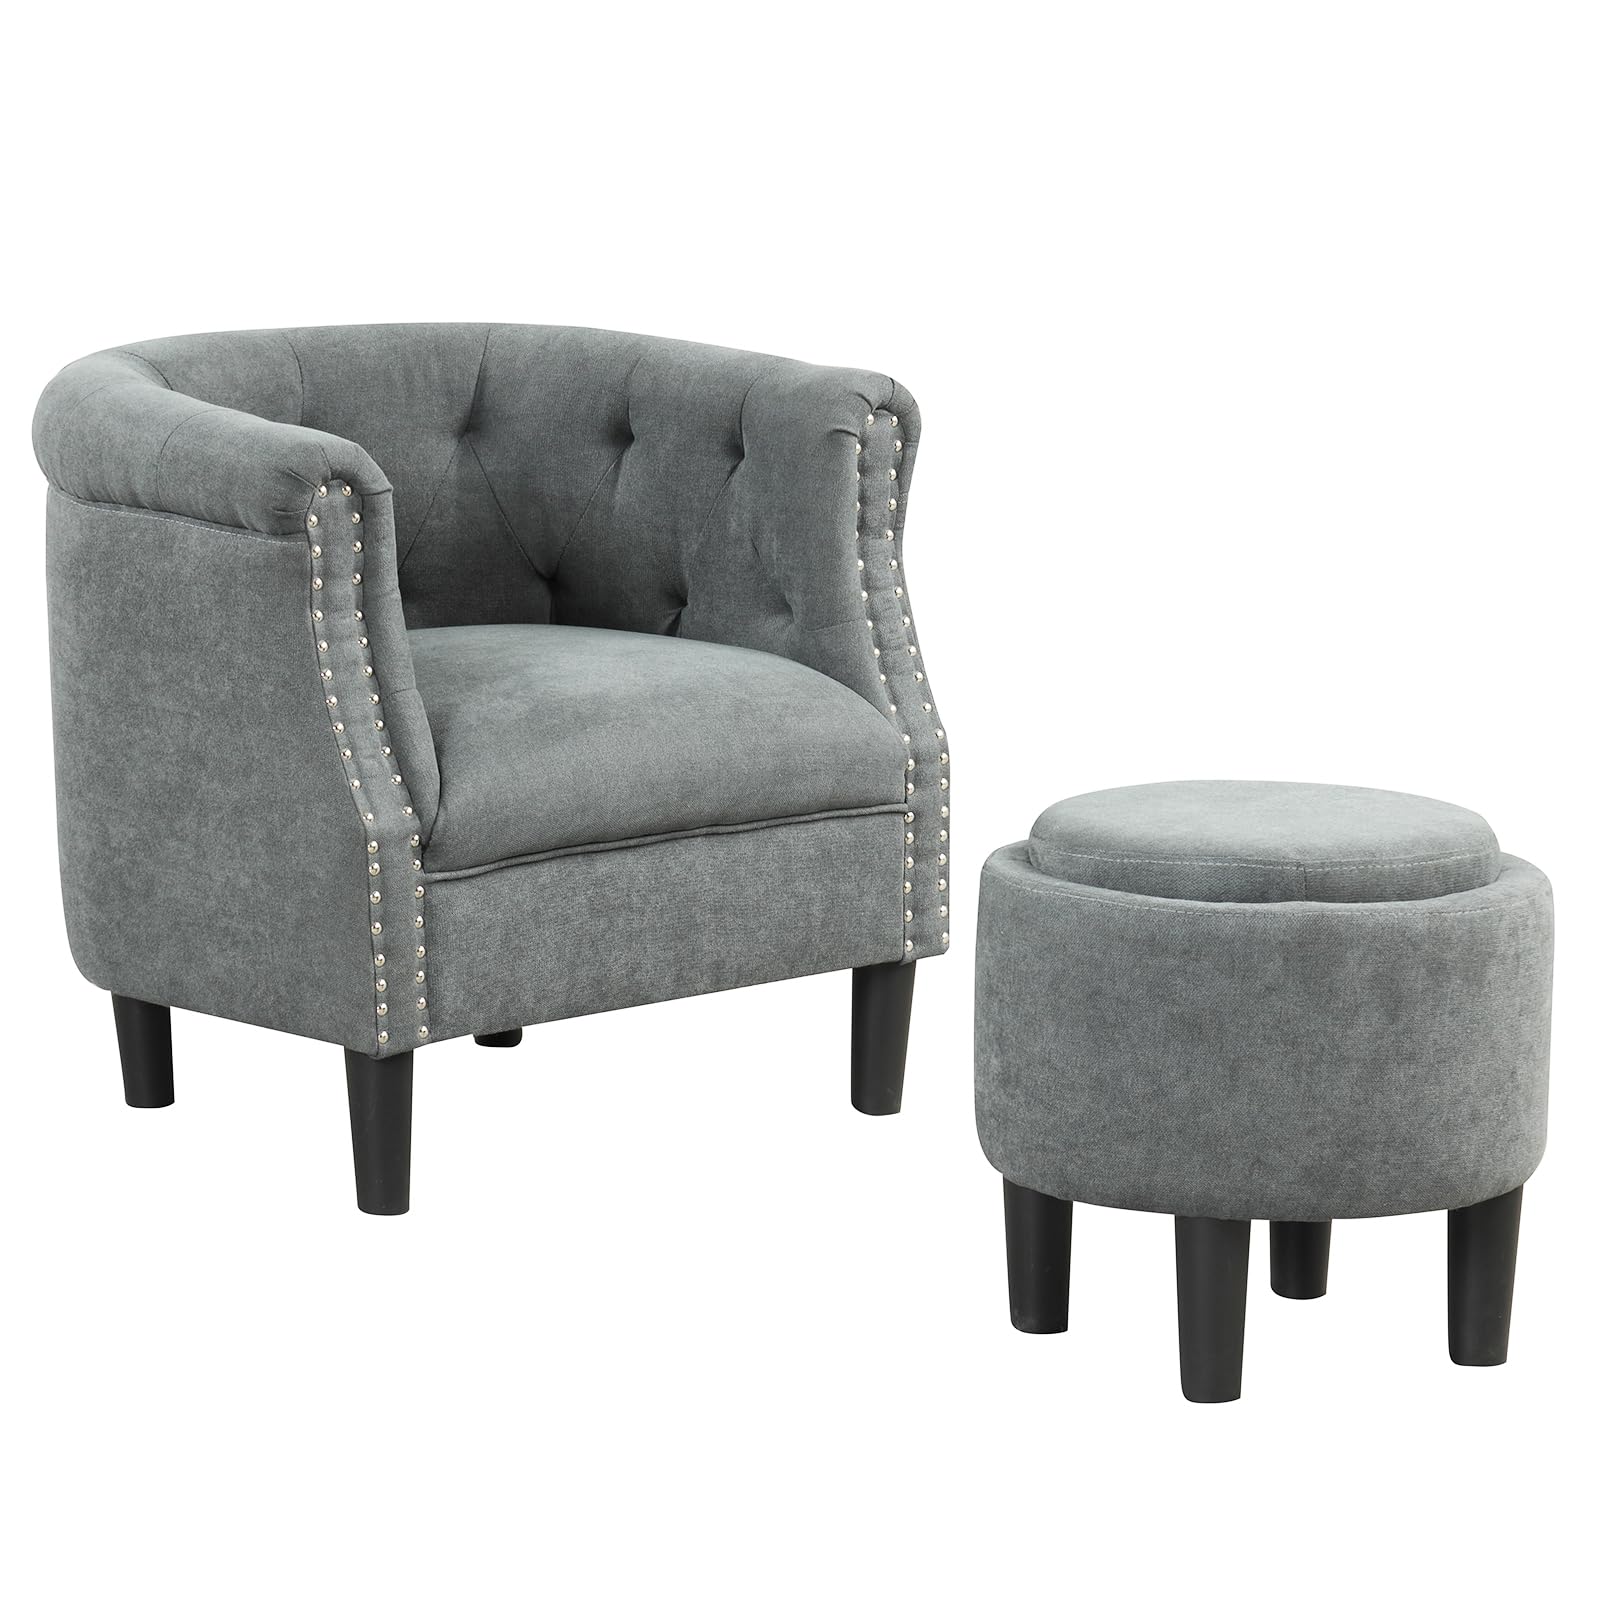 Giantex Accent Chair with Ottoman Set - Mid Century Modern Barrel Sofa Chair with Footrest (Grey)